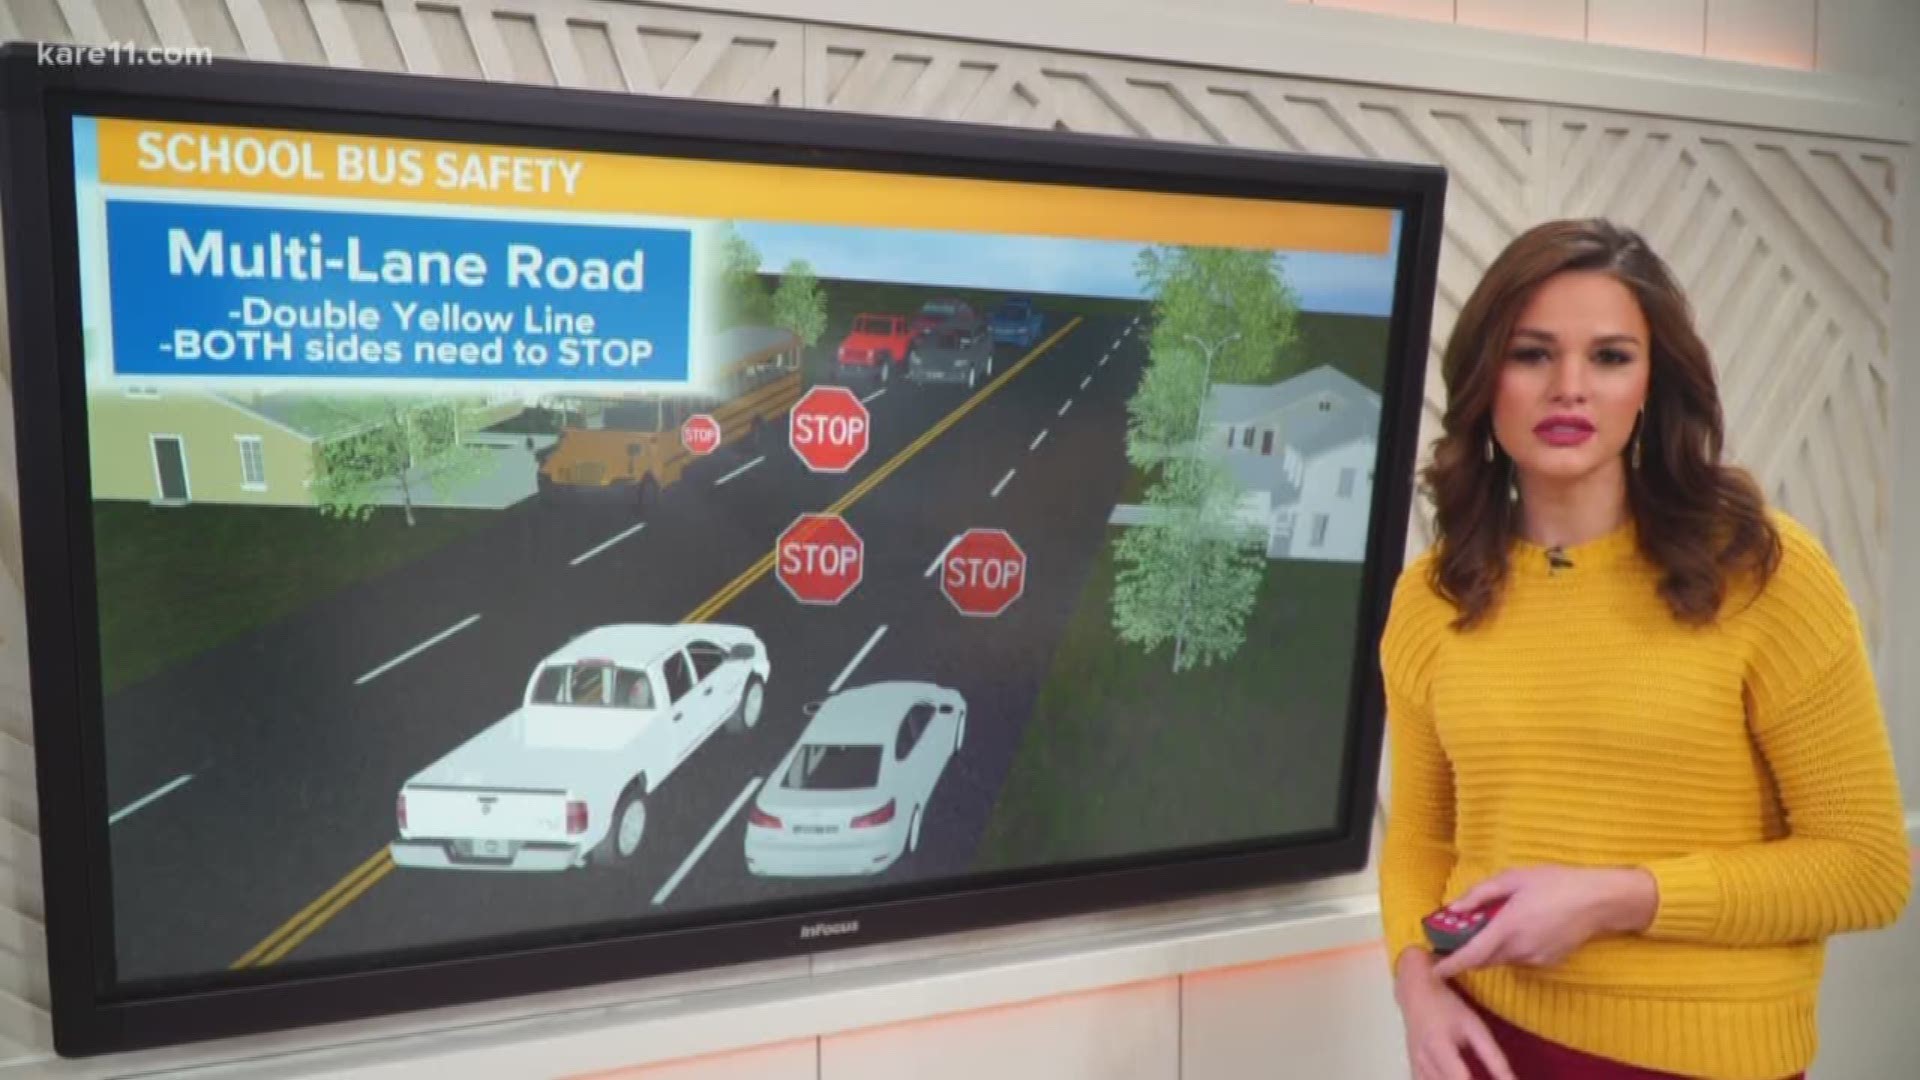 There have been six accidents in three days involving children being hit at bus stops across the country. So what are the rules of the road in Minnesota when it comes to stopping for a school bus? KARE 11's Alicia Lewis explains. https://kare11.tv/2CSL7e5